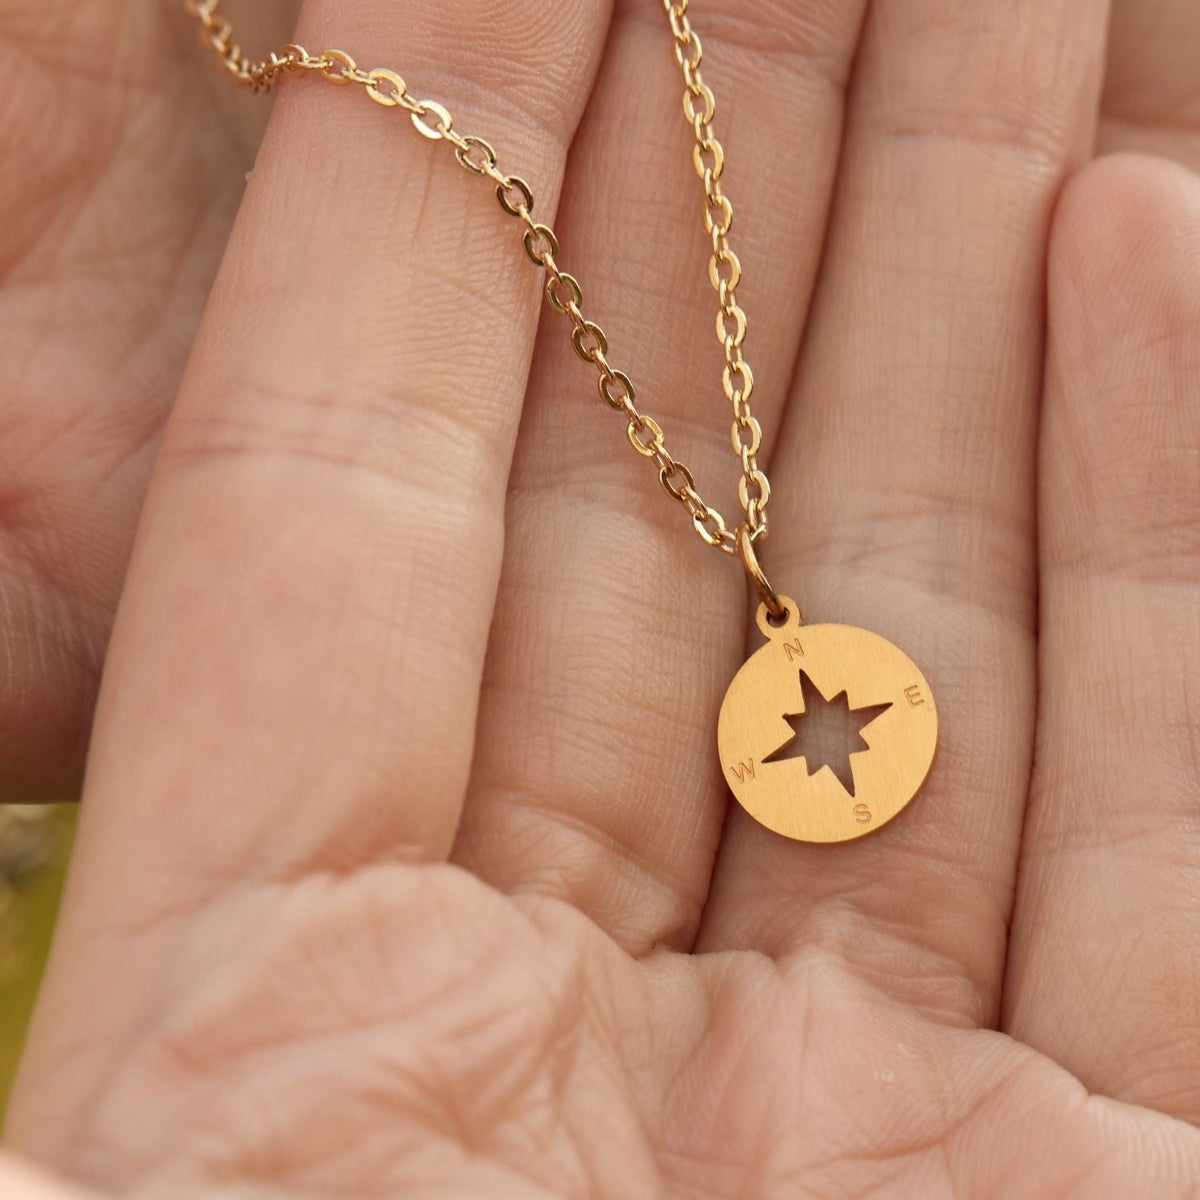 Big Sis &amp; Lil Sis | A Special Bond | Compass Necklace